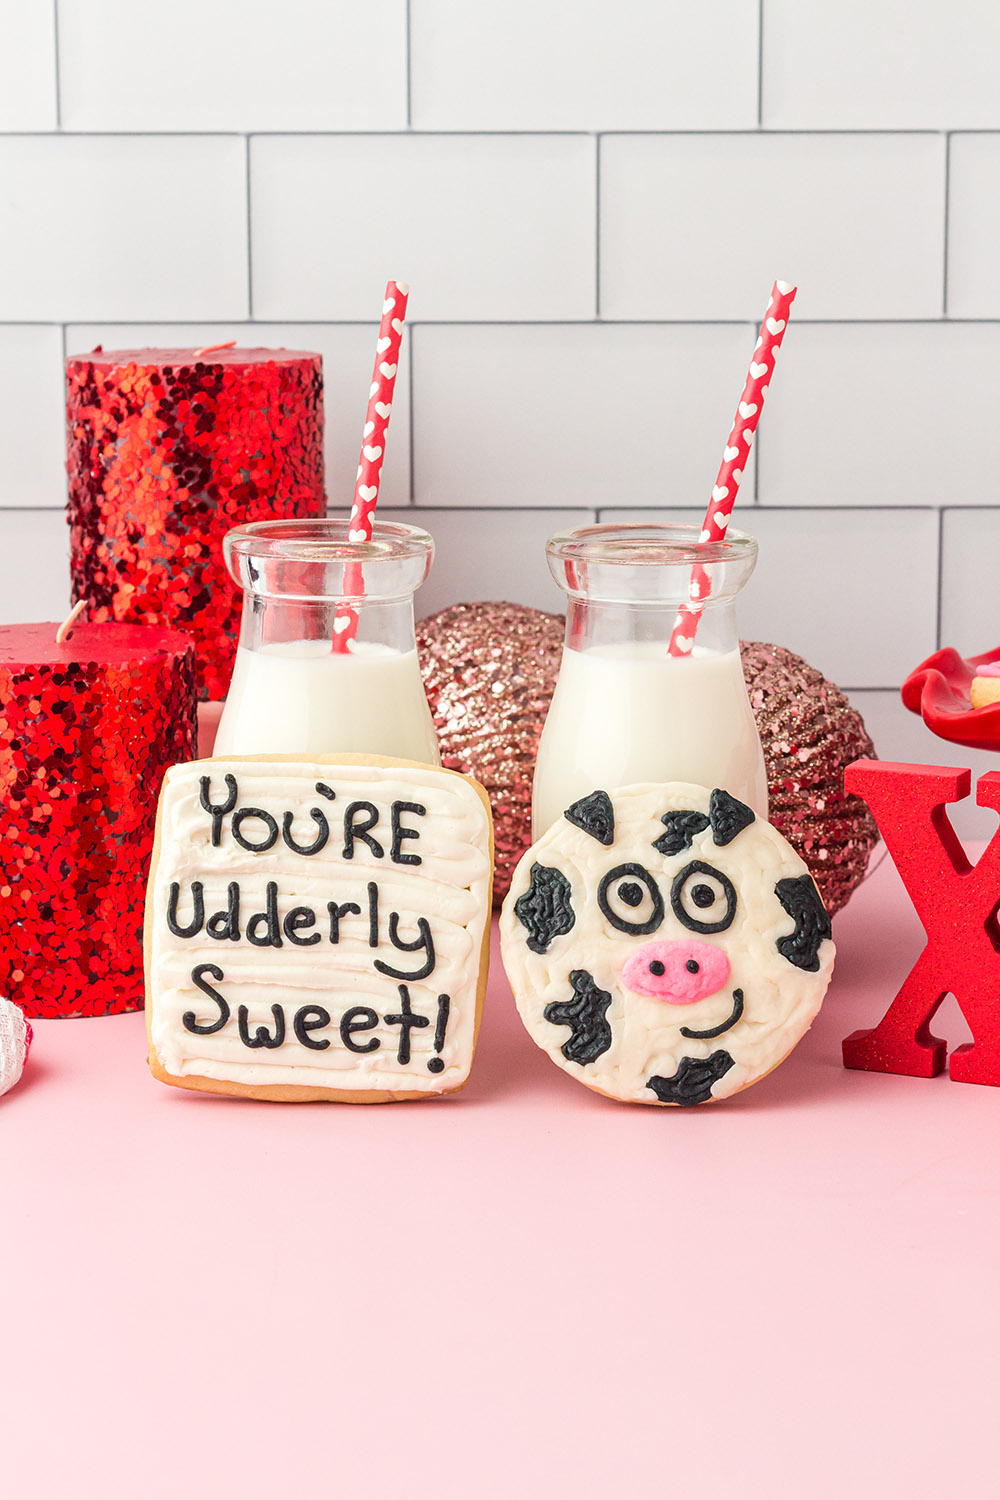 You're Udderly Sweet and a cow Valentine's themed cookies next to milk on a table. 